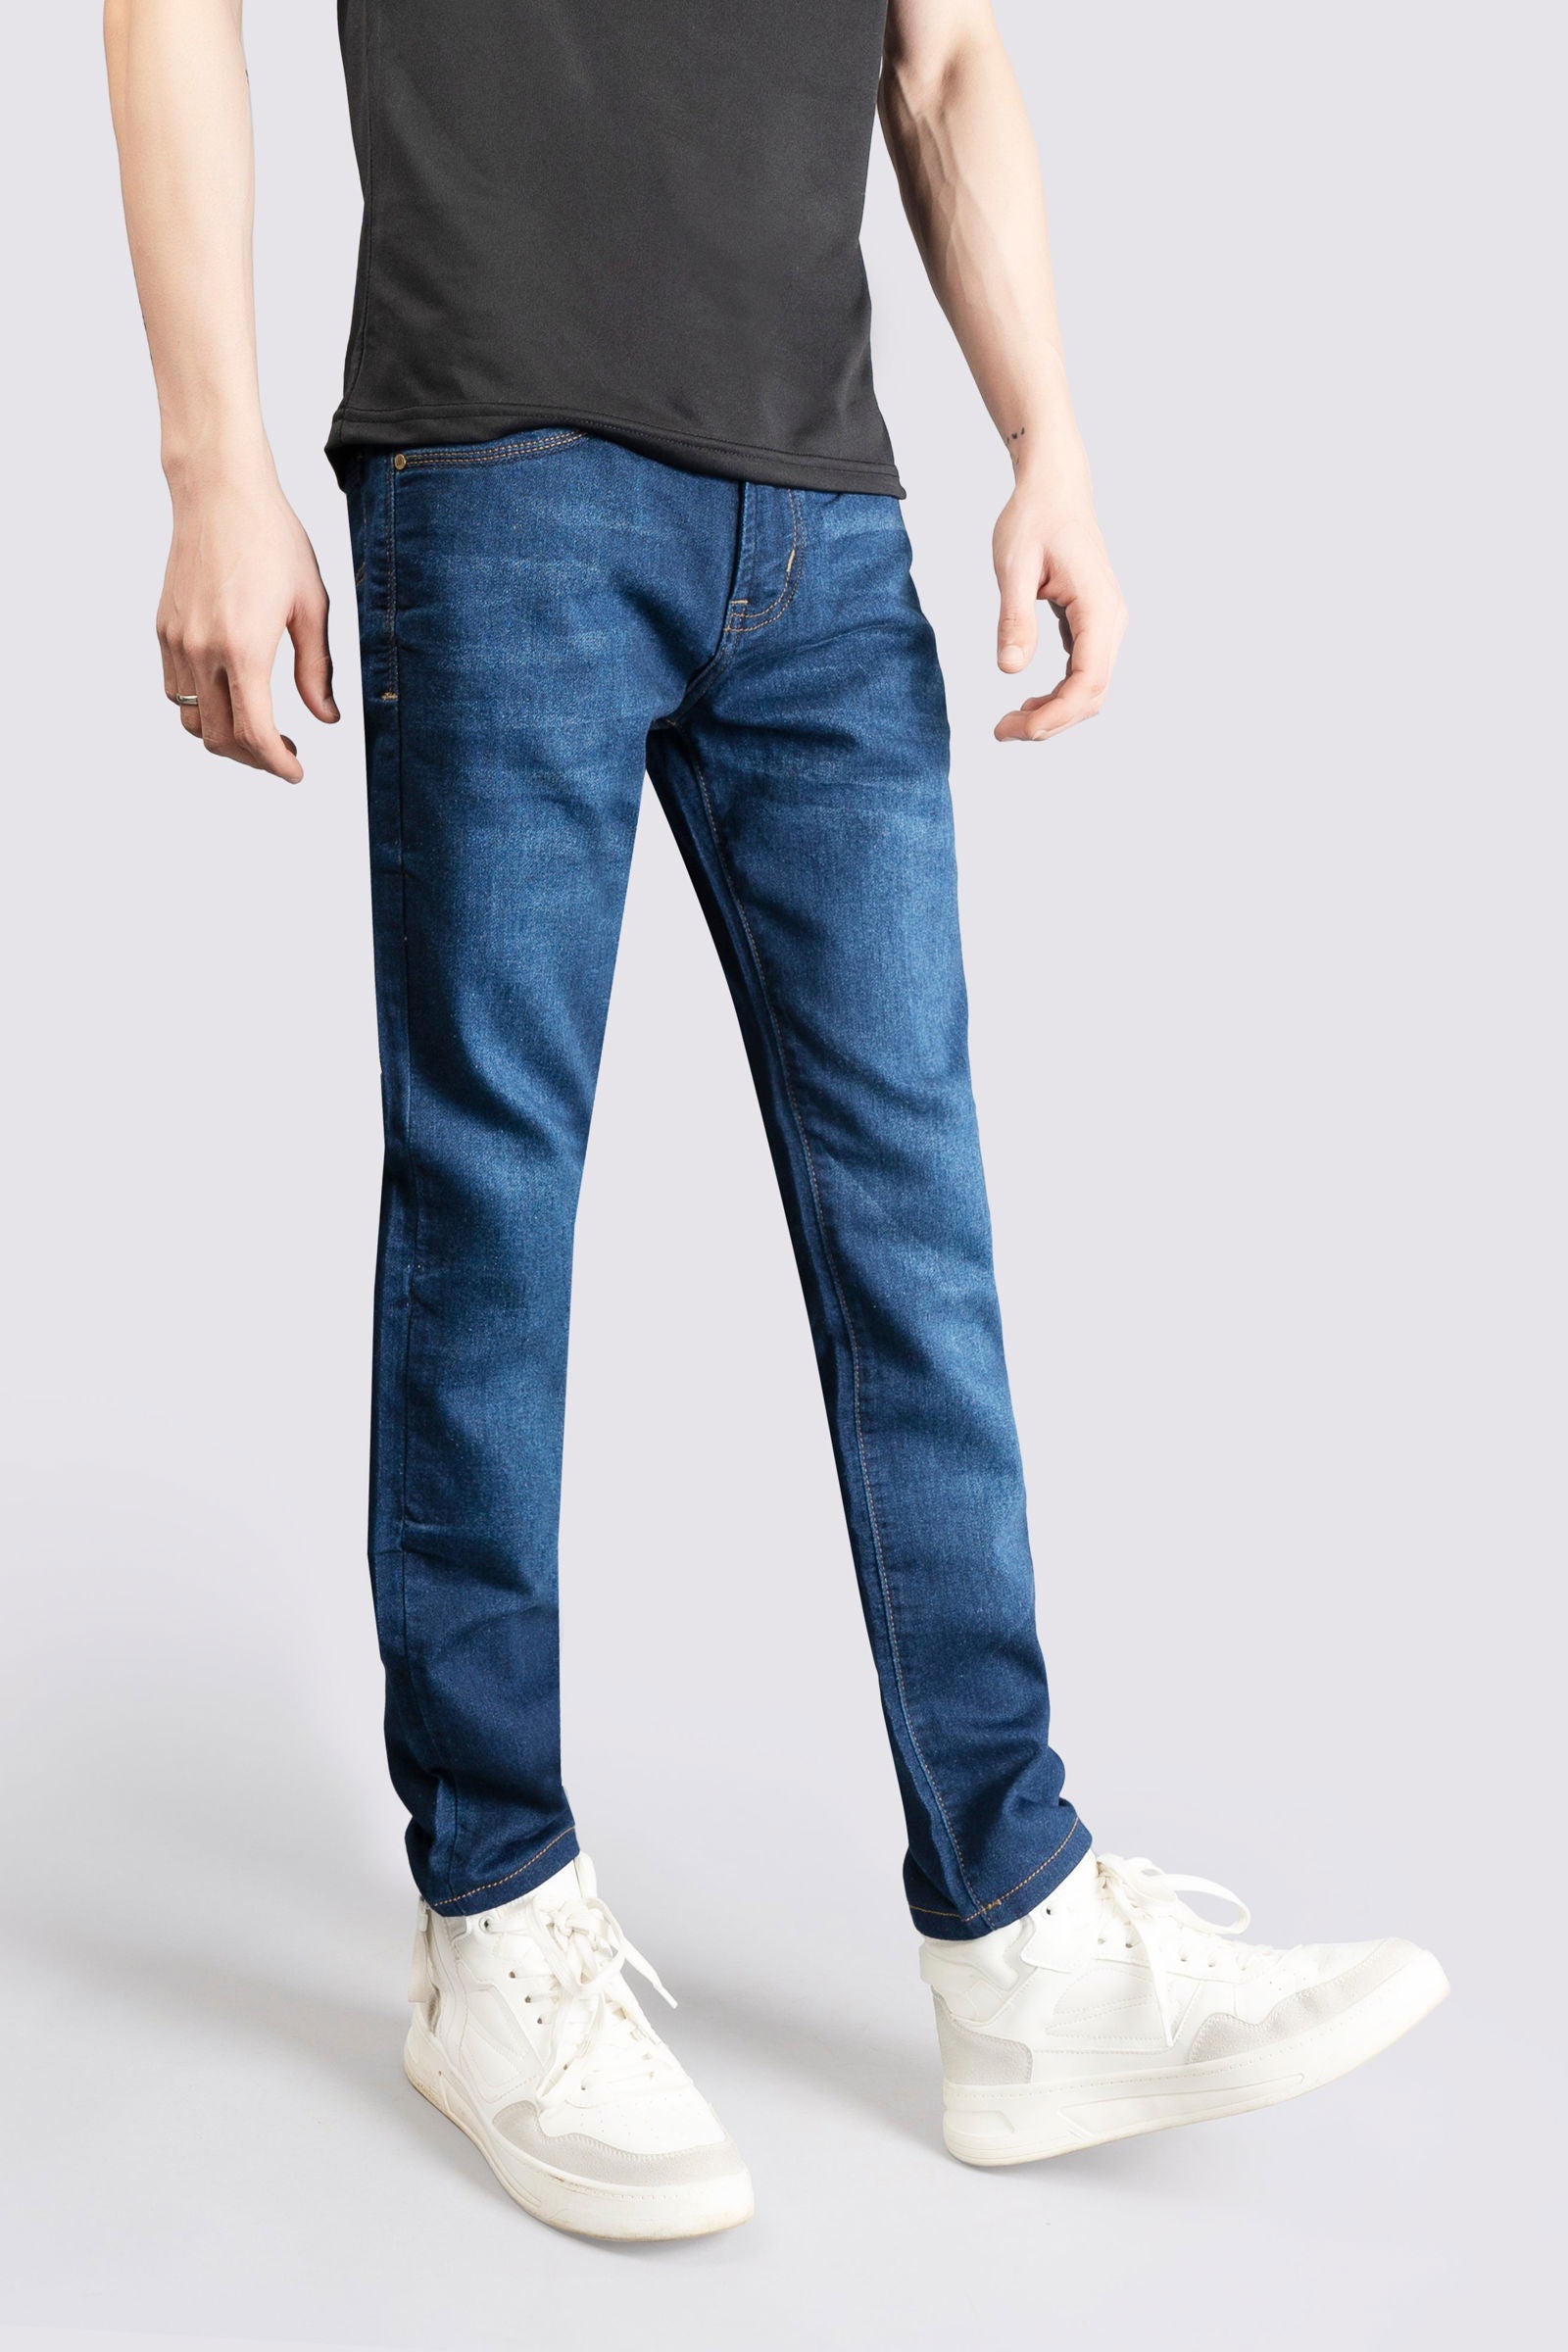 Knitted Regular Stretch Navy Blue Jeans - The Axis Clothing